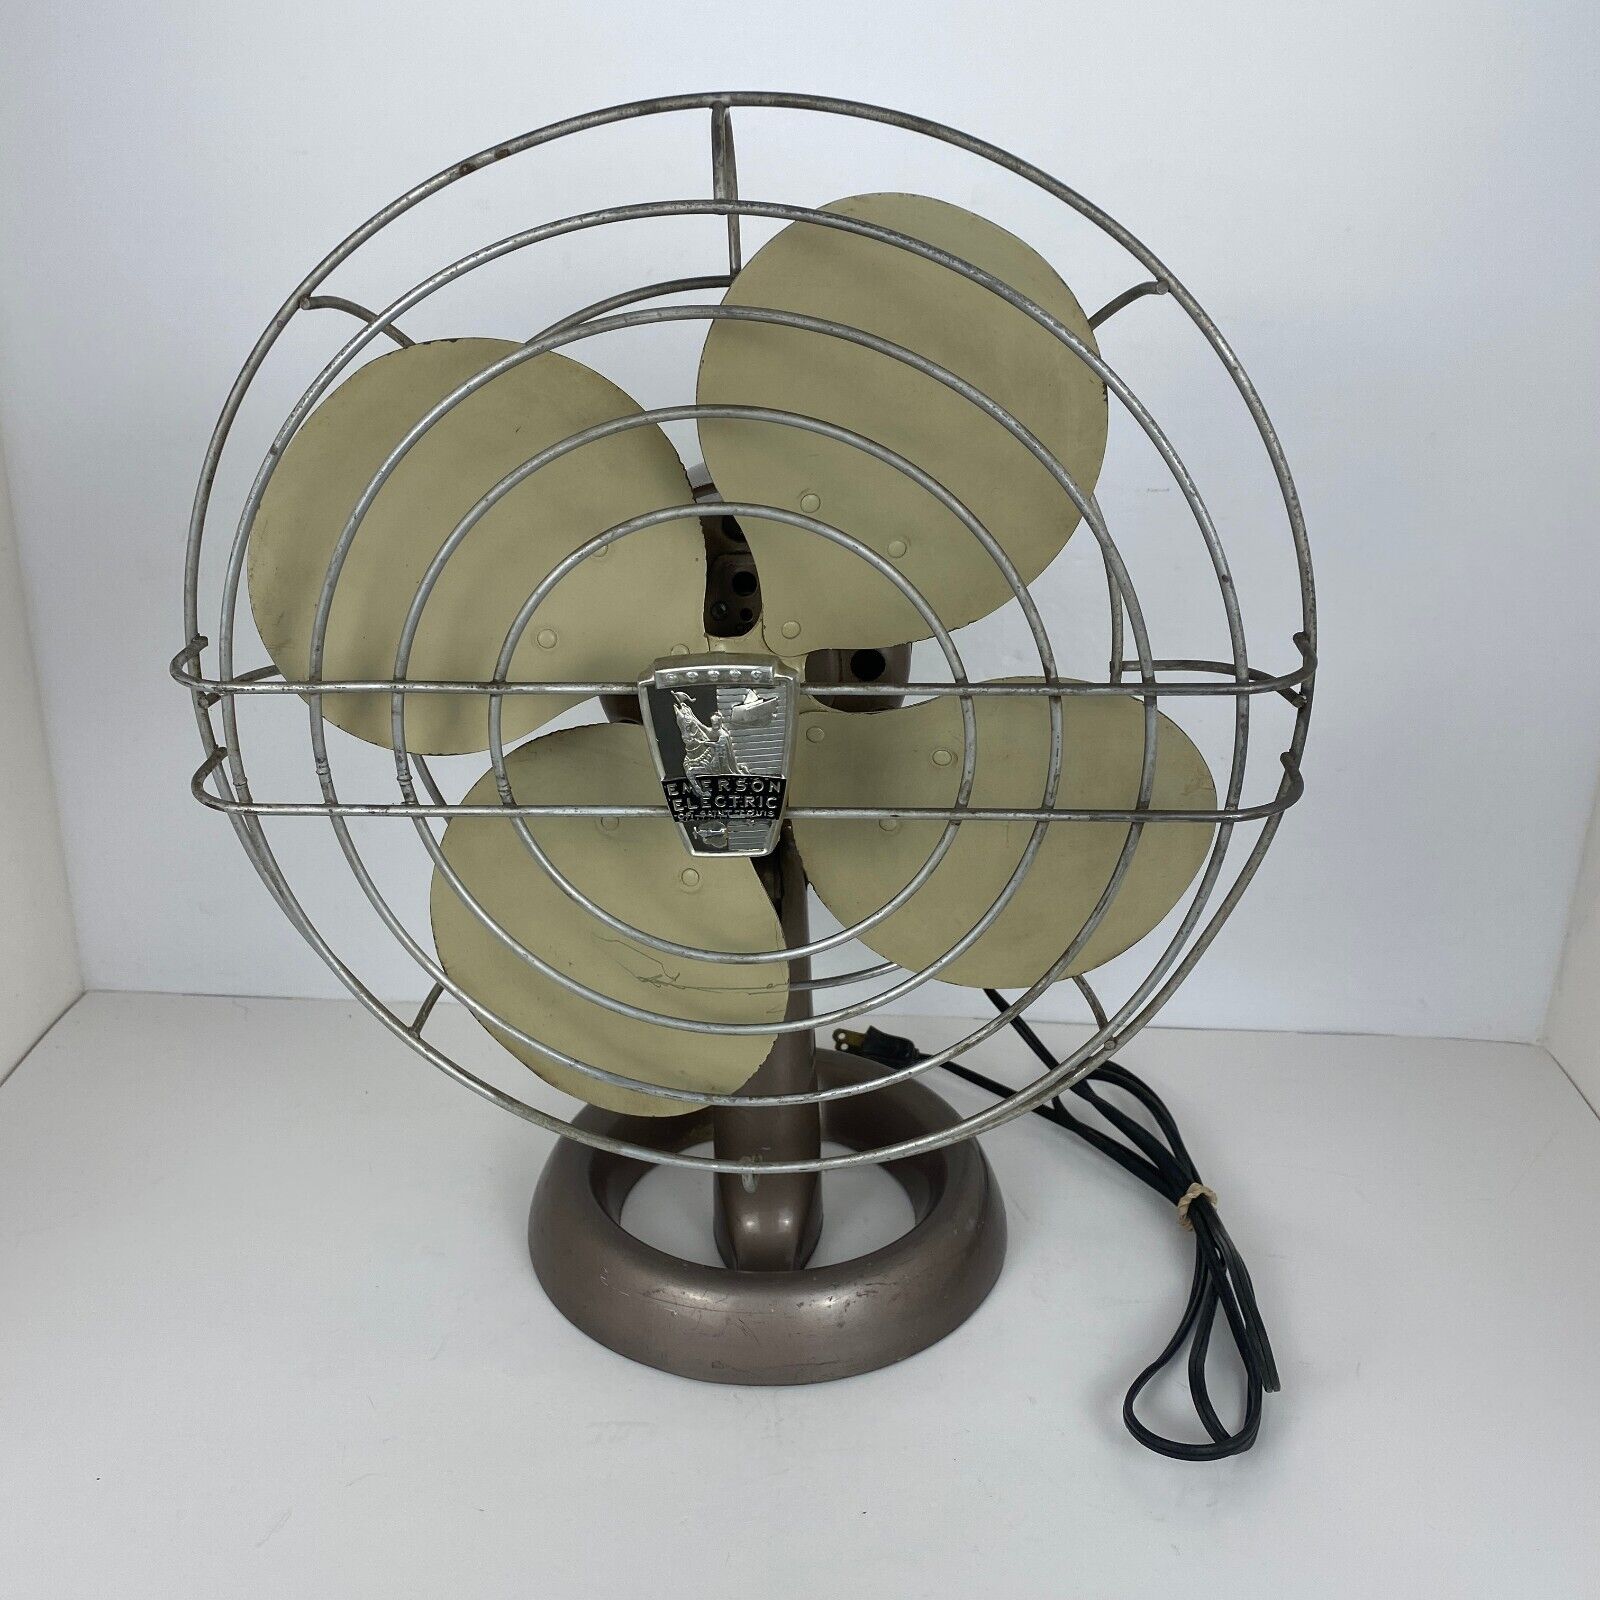 Vintage Fan Emerson Electric Of St. Louis 2 Speed Metal Blades Oscillating 1950s